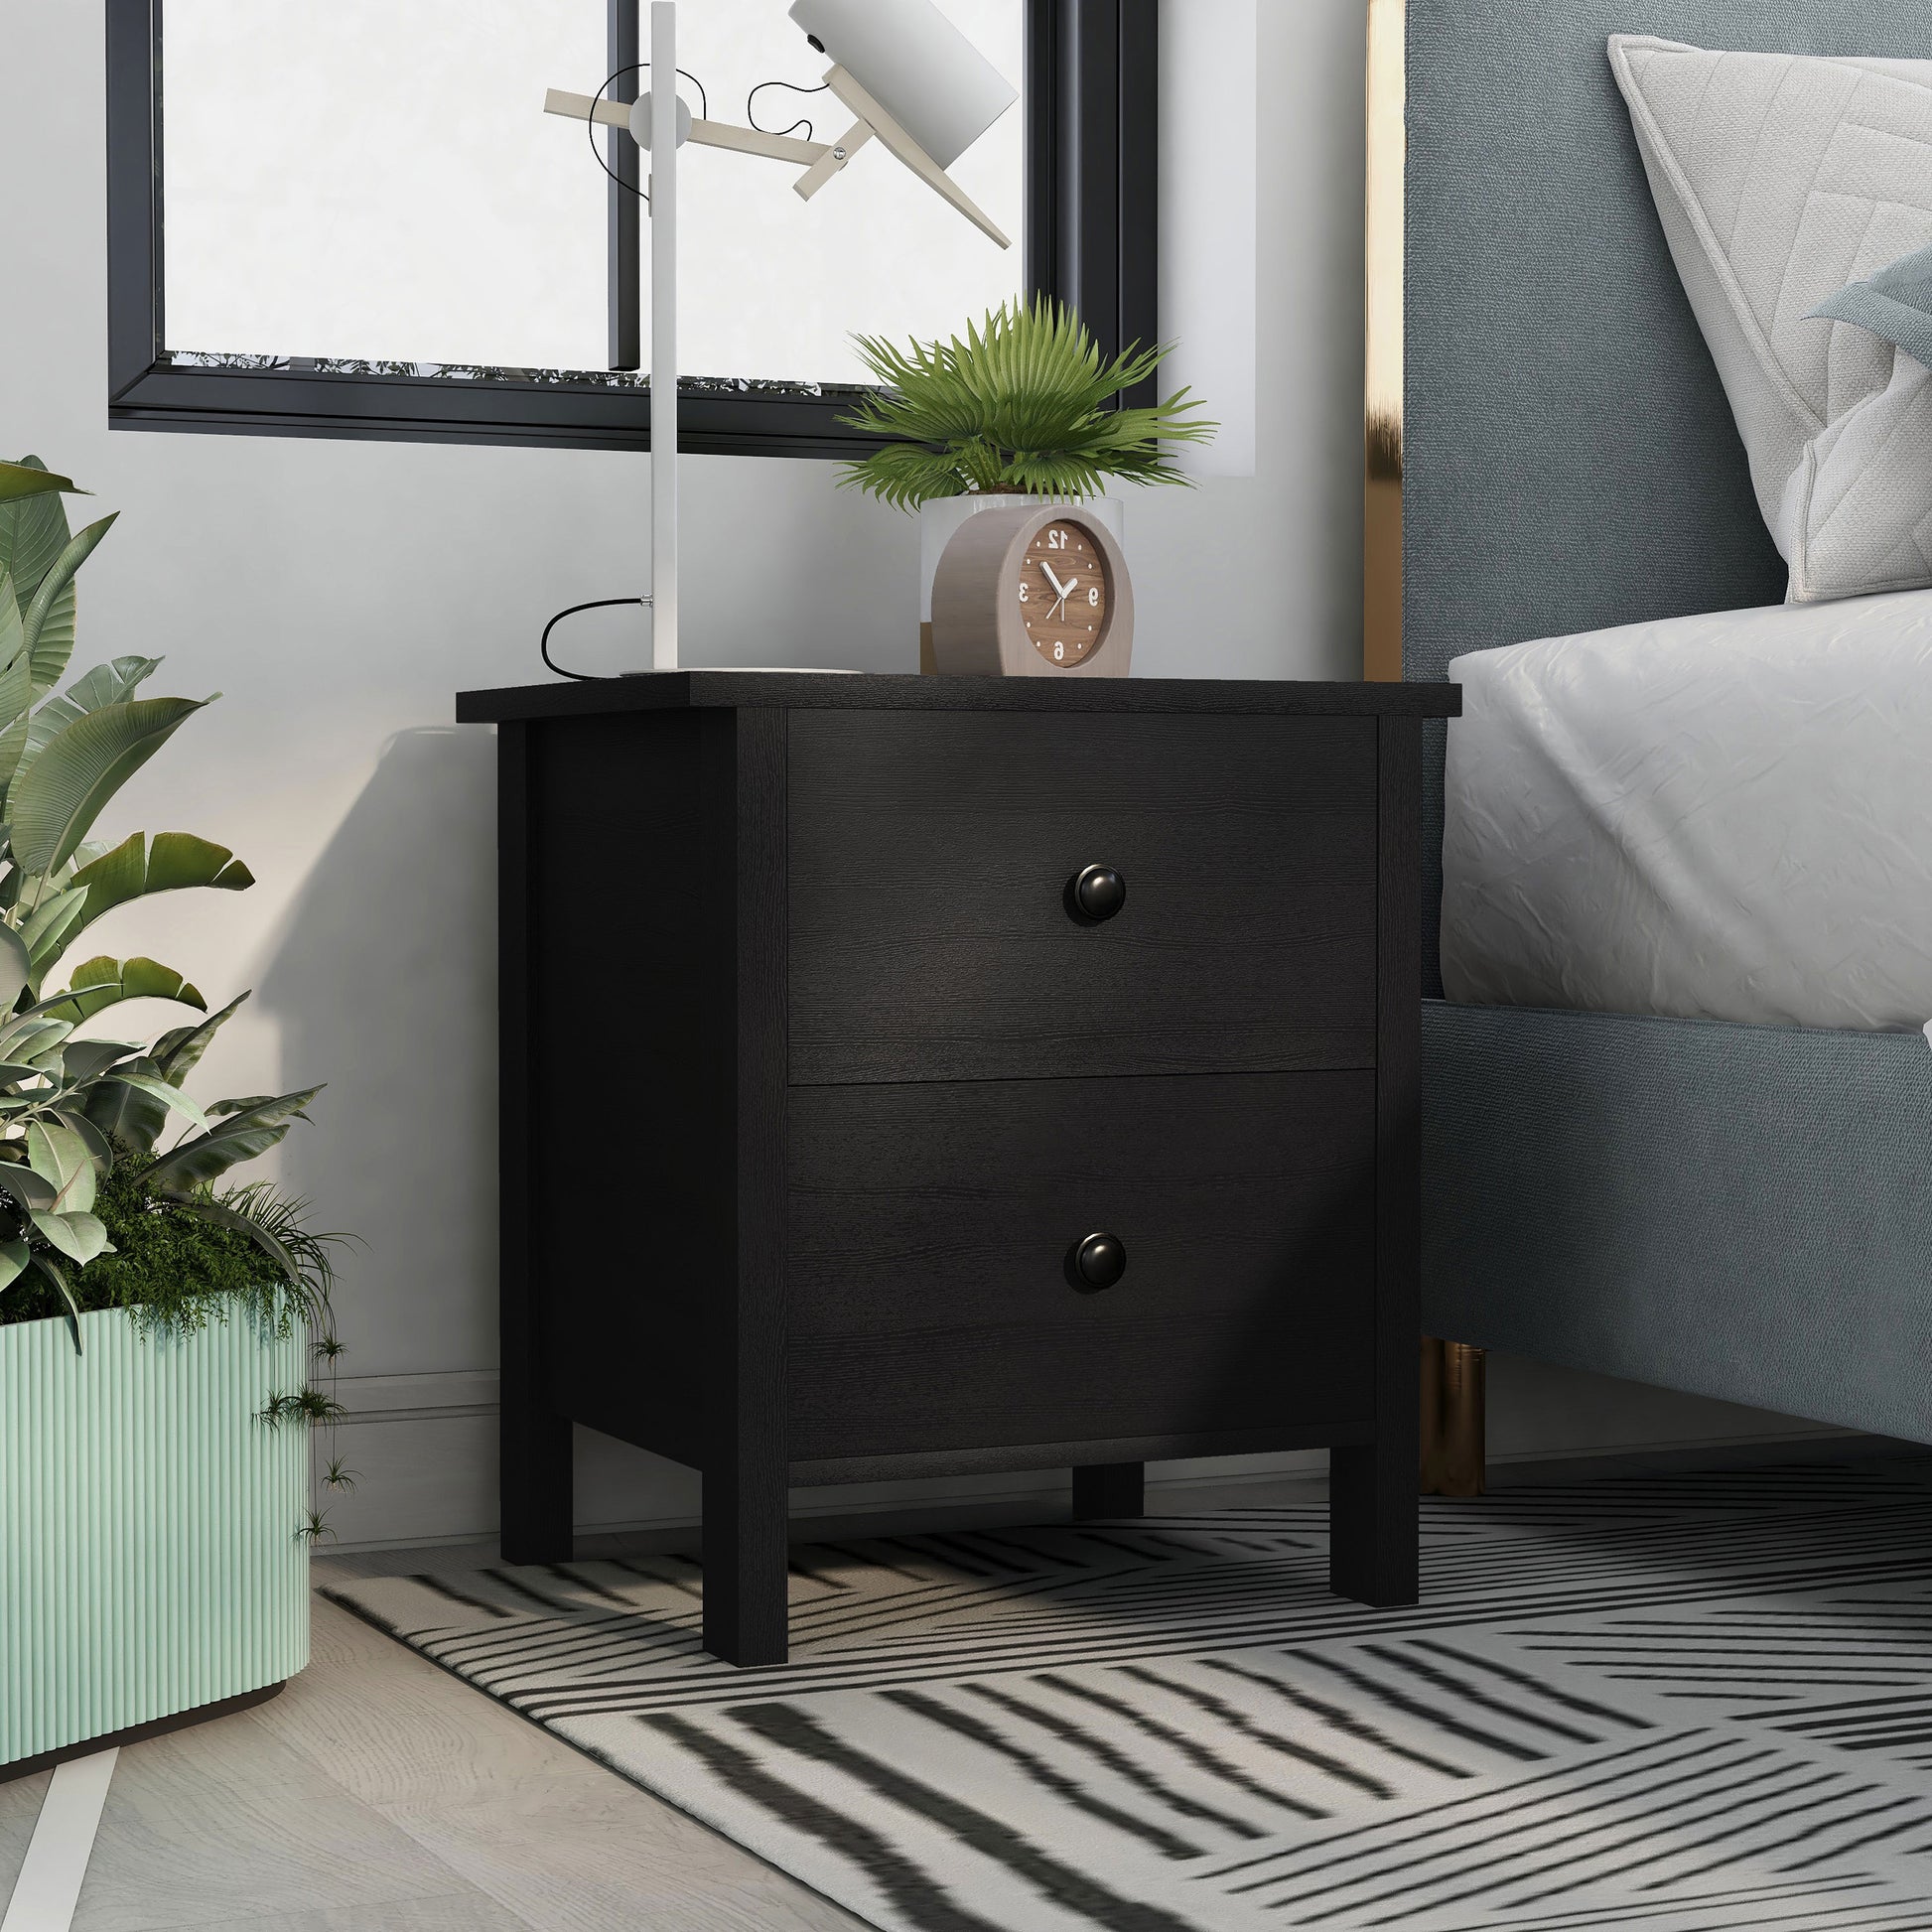 Right angled transitional black two-drawer nightstand in a bedroom with accessories